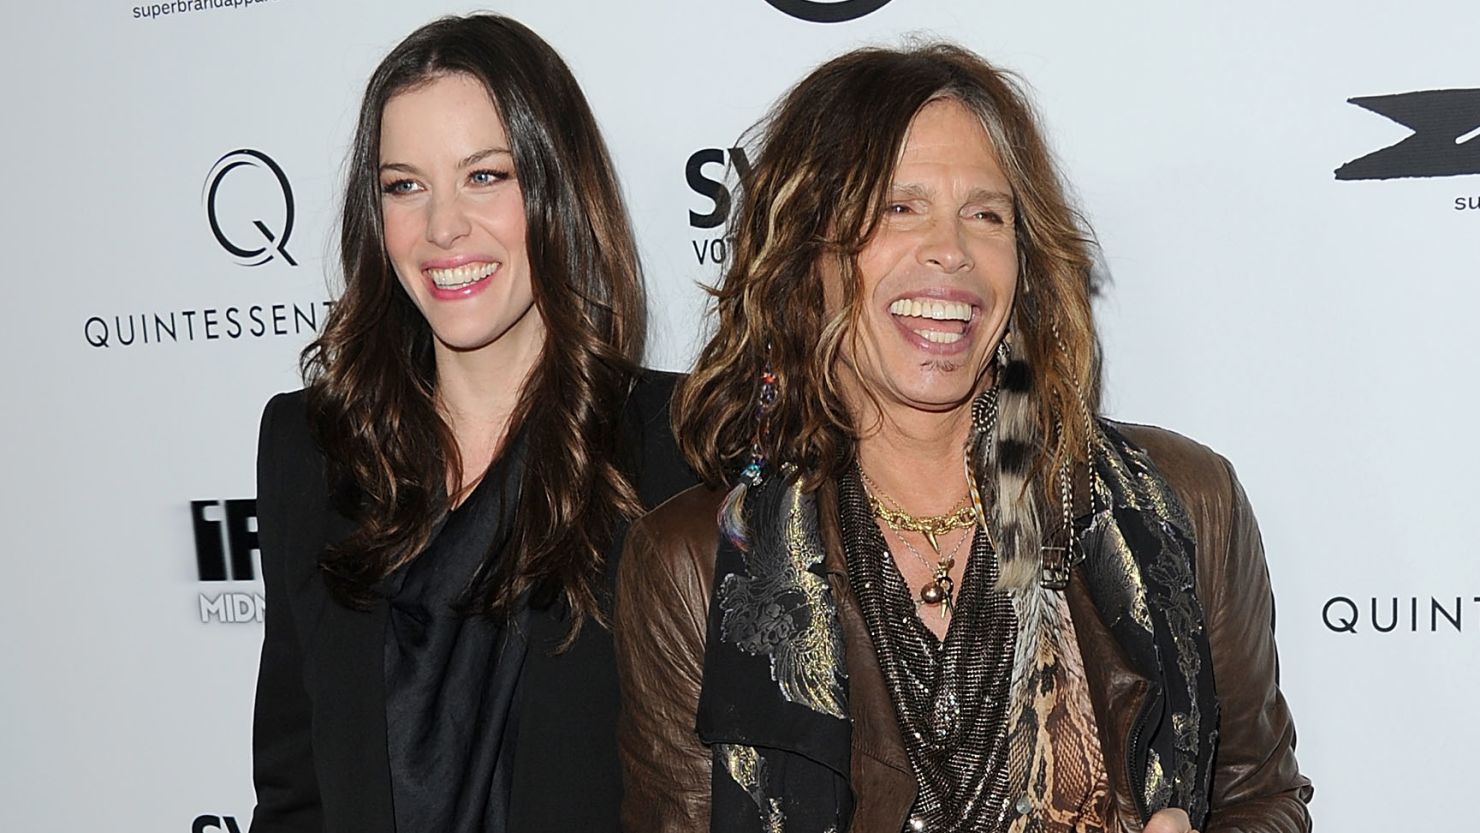 Liv Tyler and her father Steven Tyler, shown here attending a premiere in March 2011.